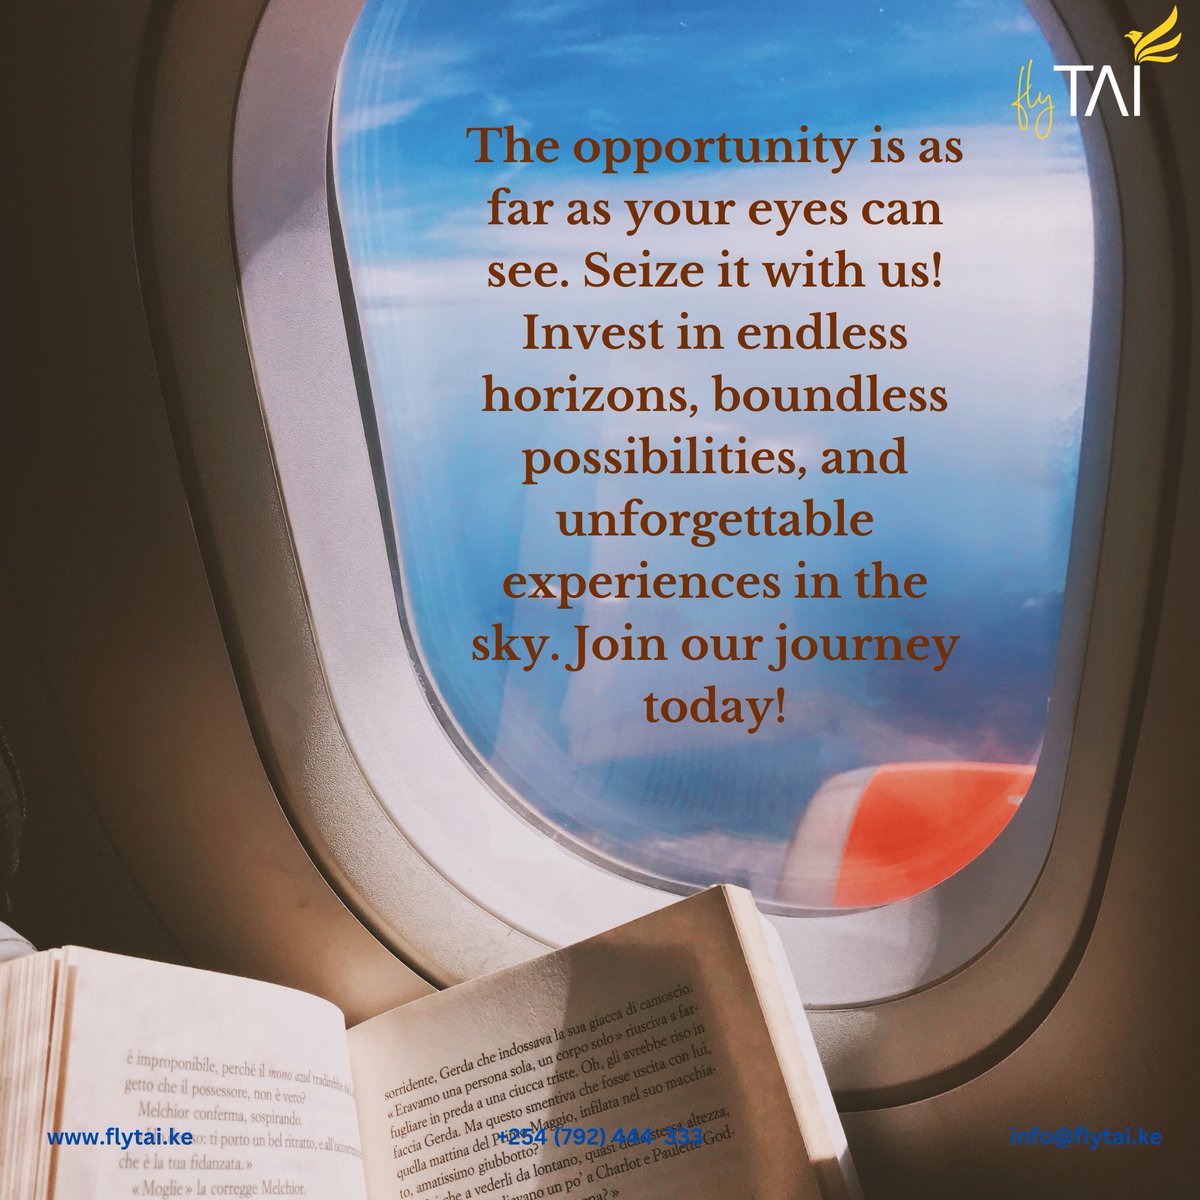 Secure your seat on the ground floor of our exciting airline venture
#Putyournameinthesky #flytai #investinthesky #investinus #invest